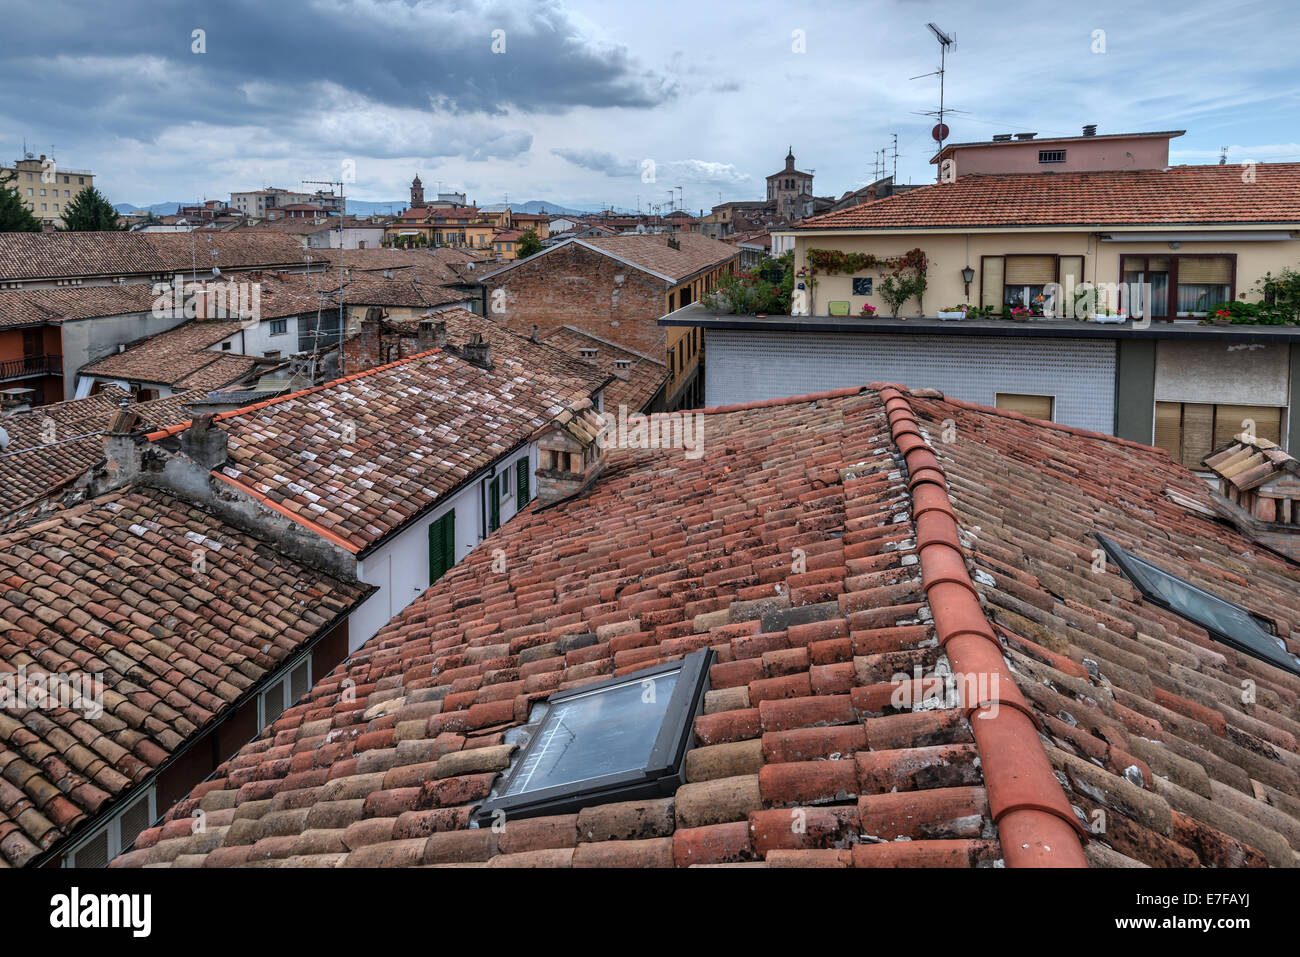 tile roof on italy town Stock Photo